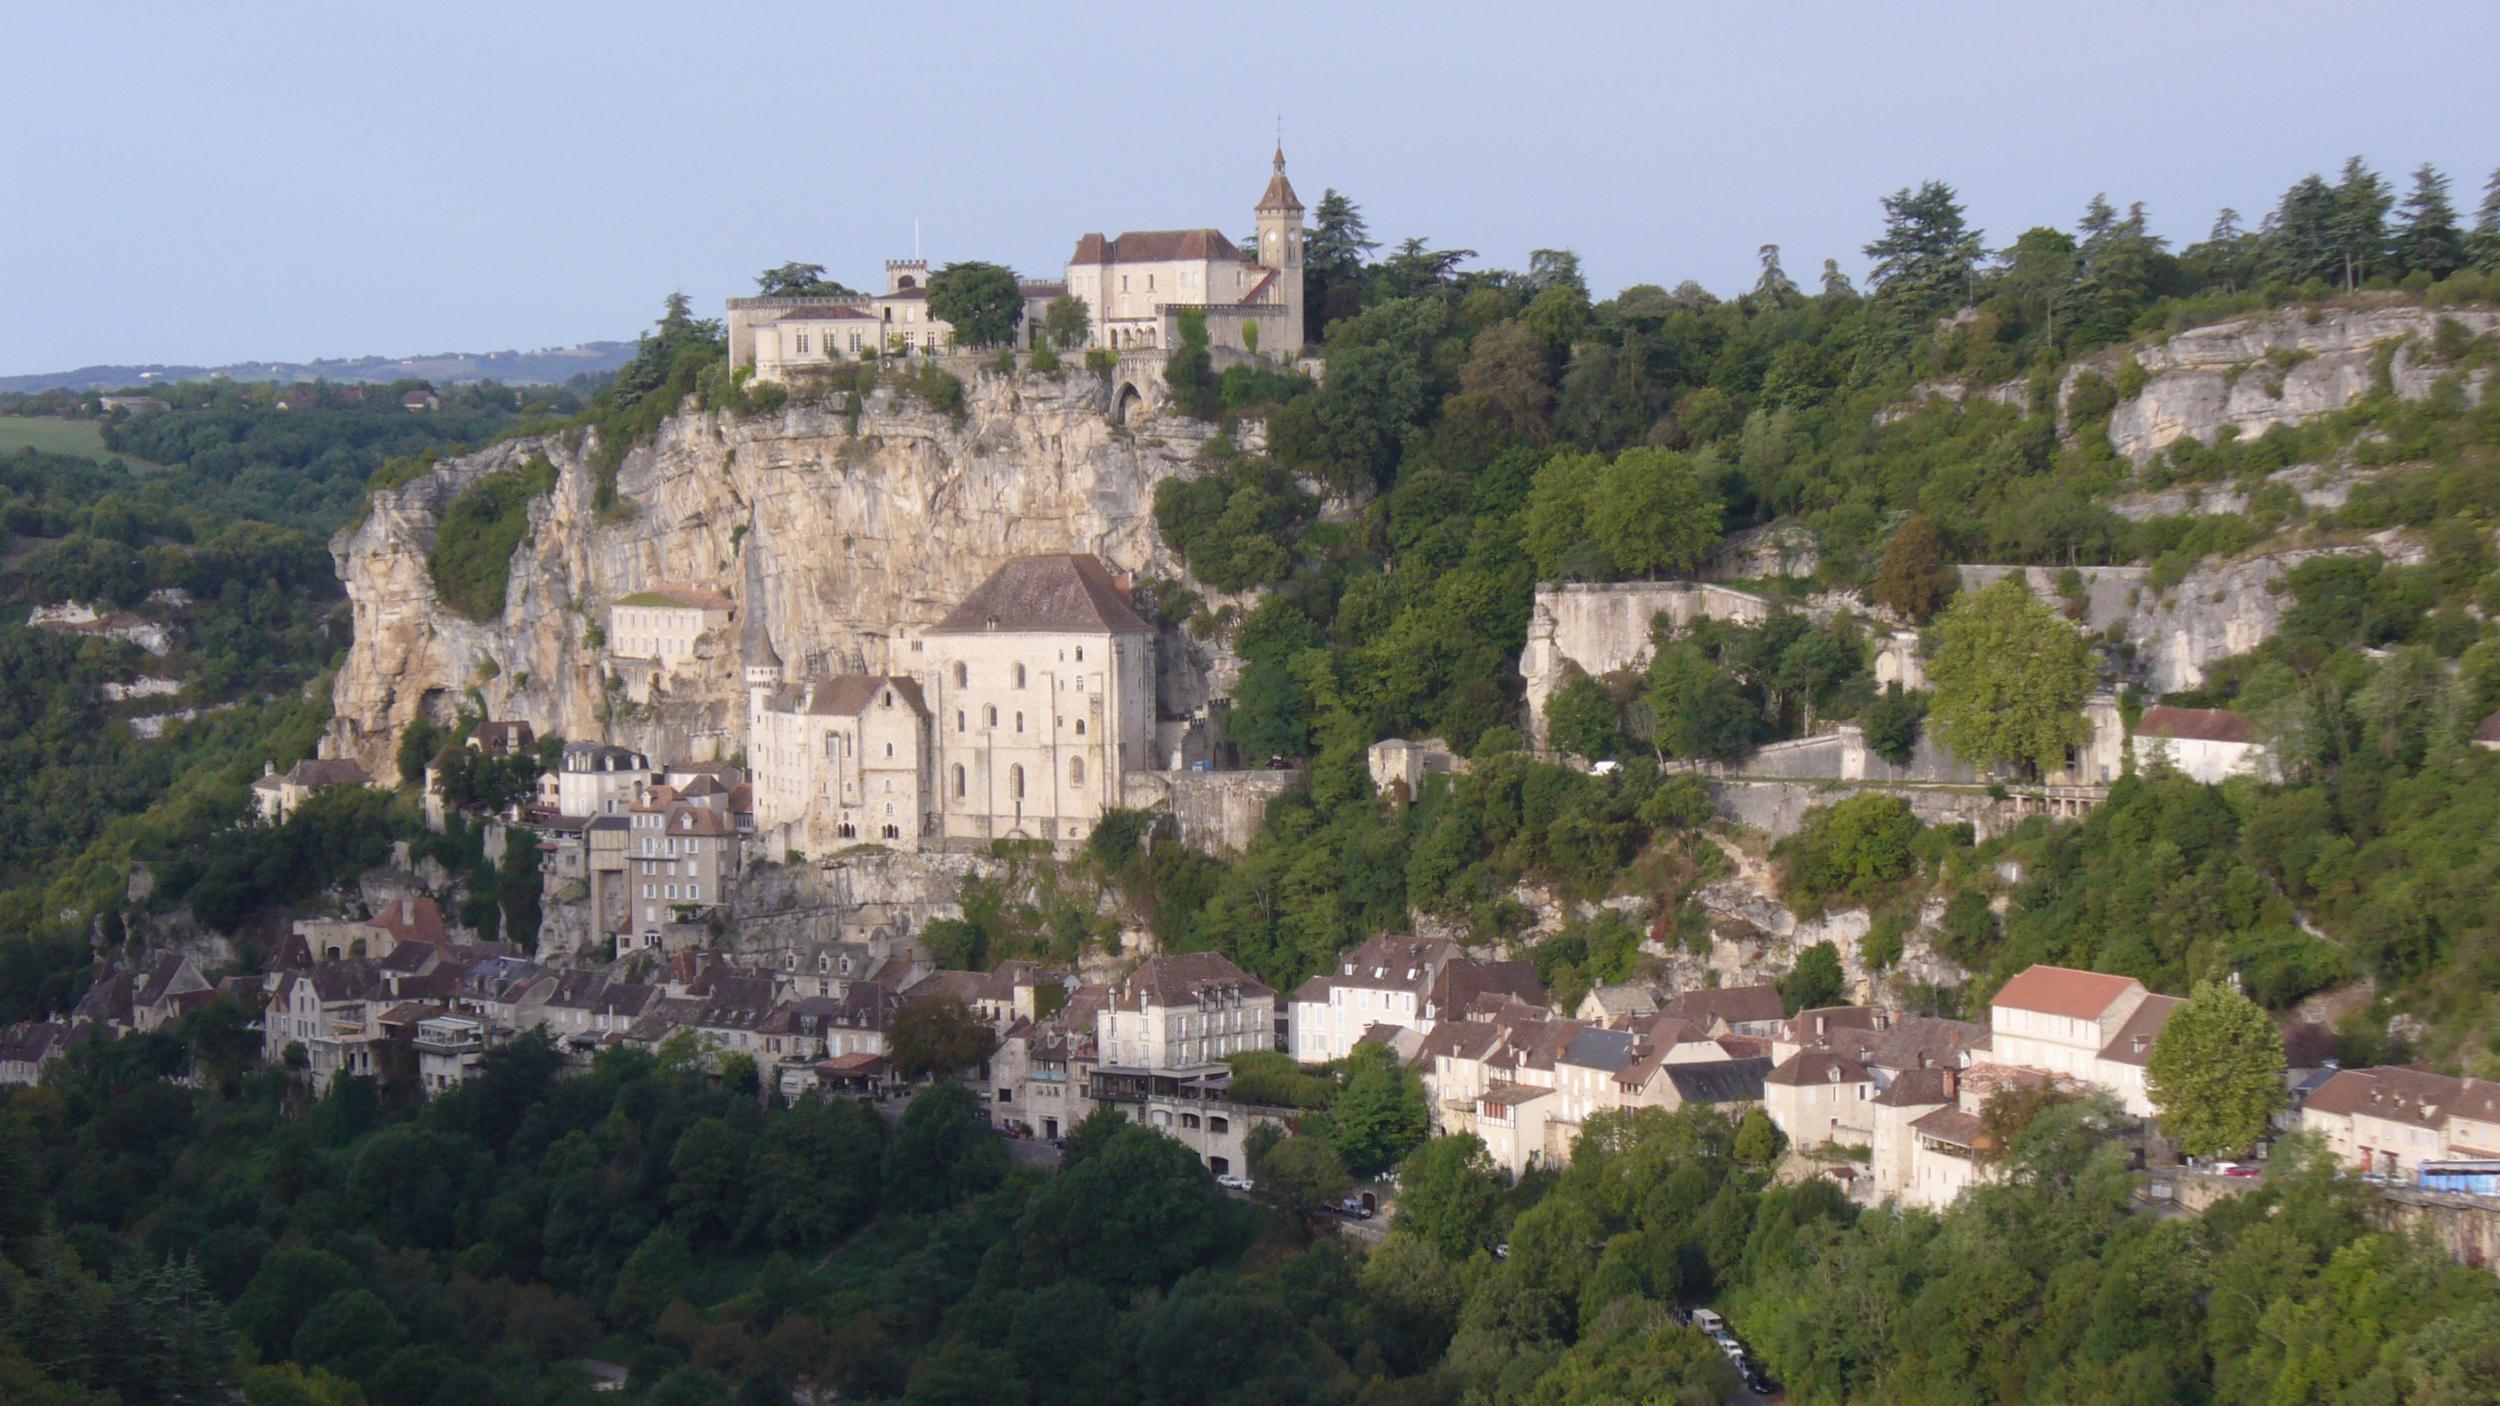 Rocamadour sits inside a cliff face and is a stone’s throw away from underground canyons and canoeing spots